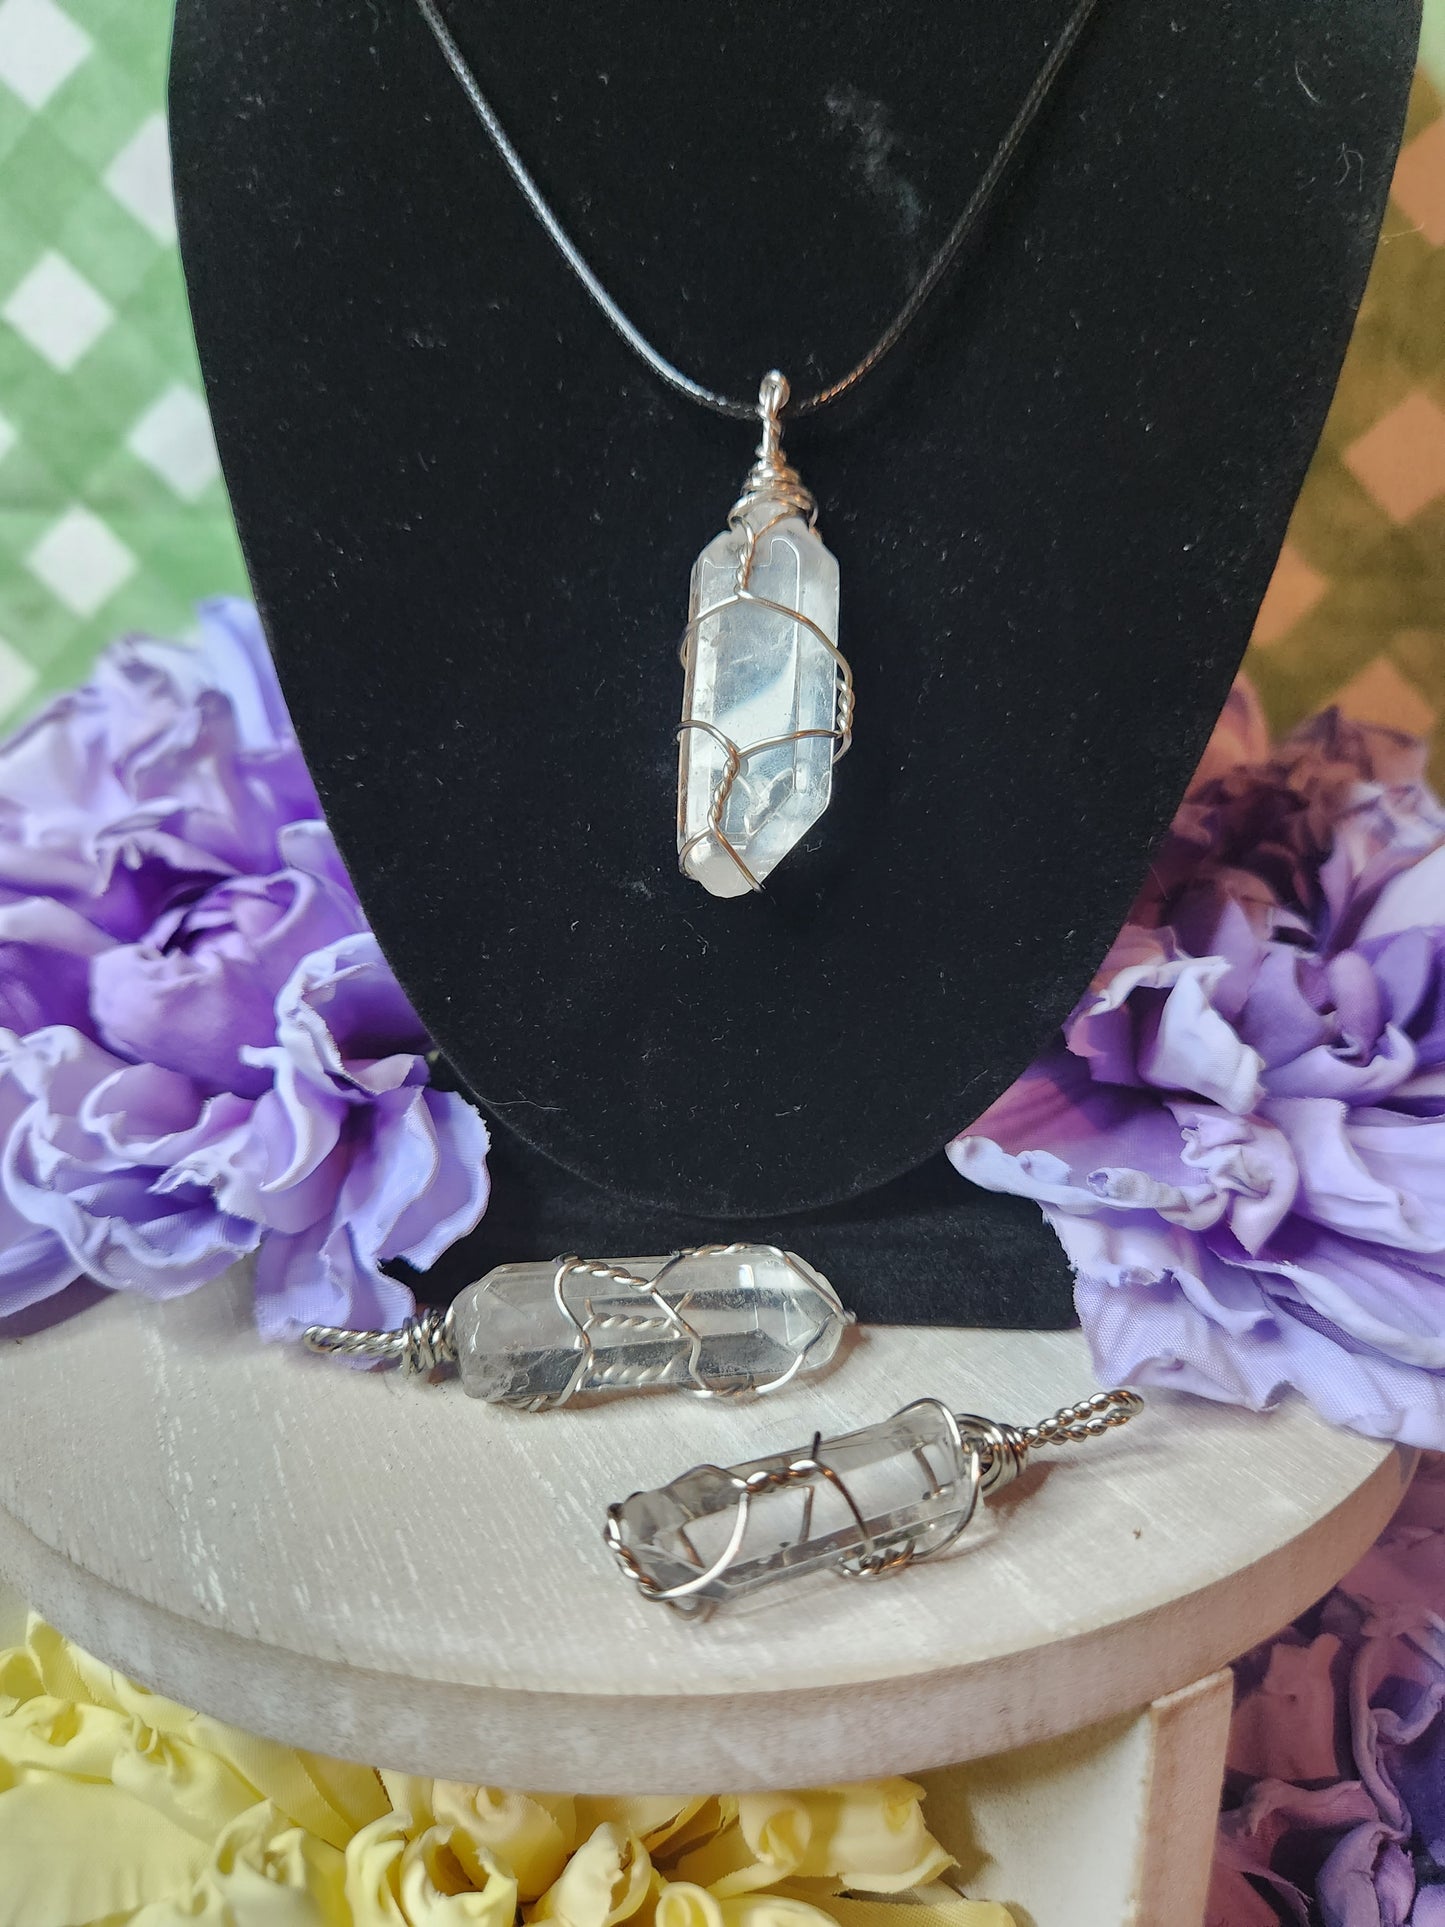 Basic cage wrapped clear quartz necklace